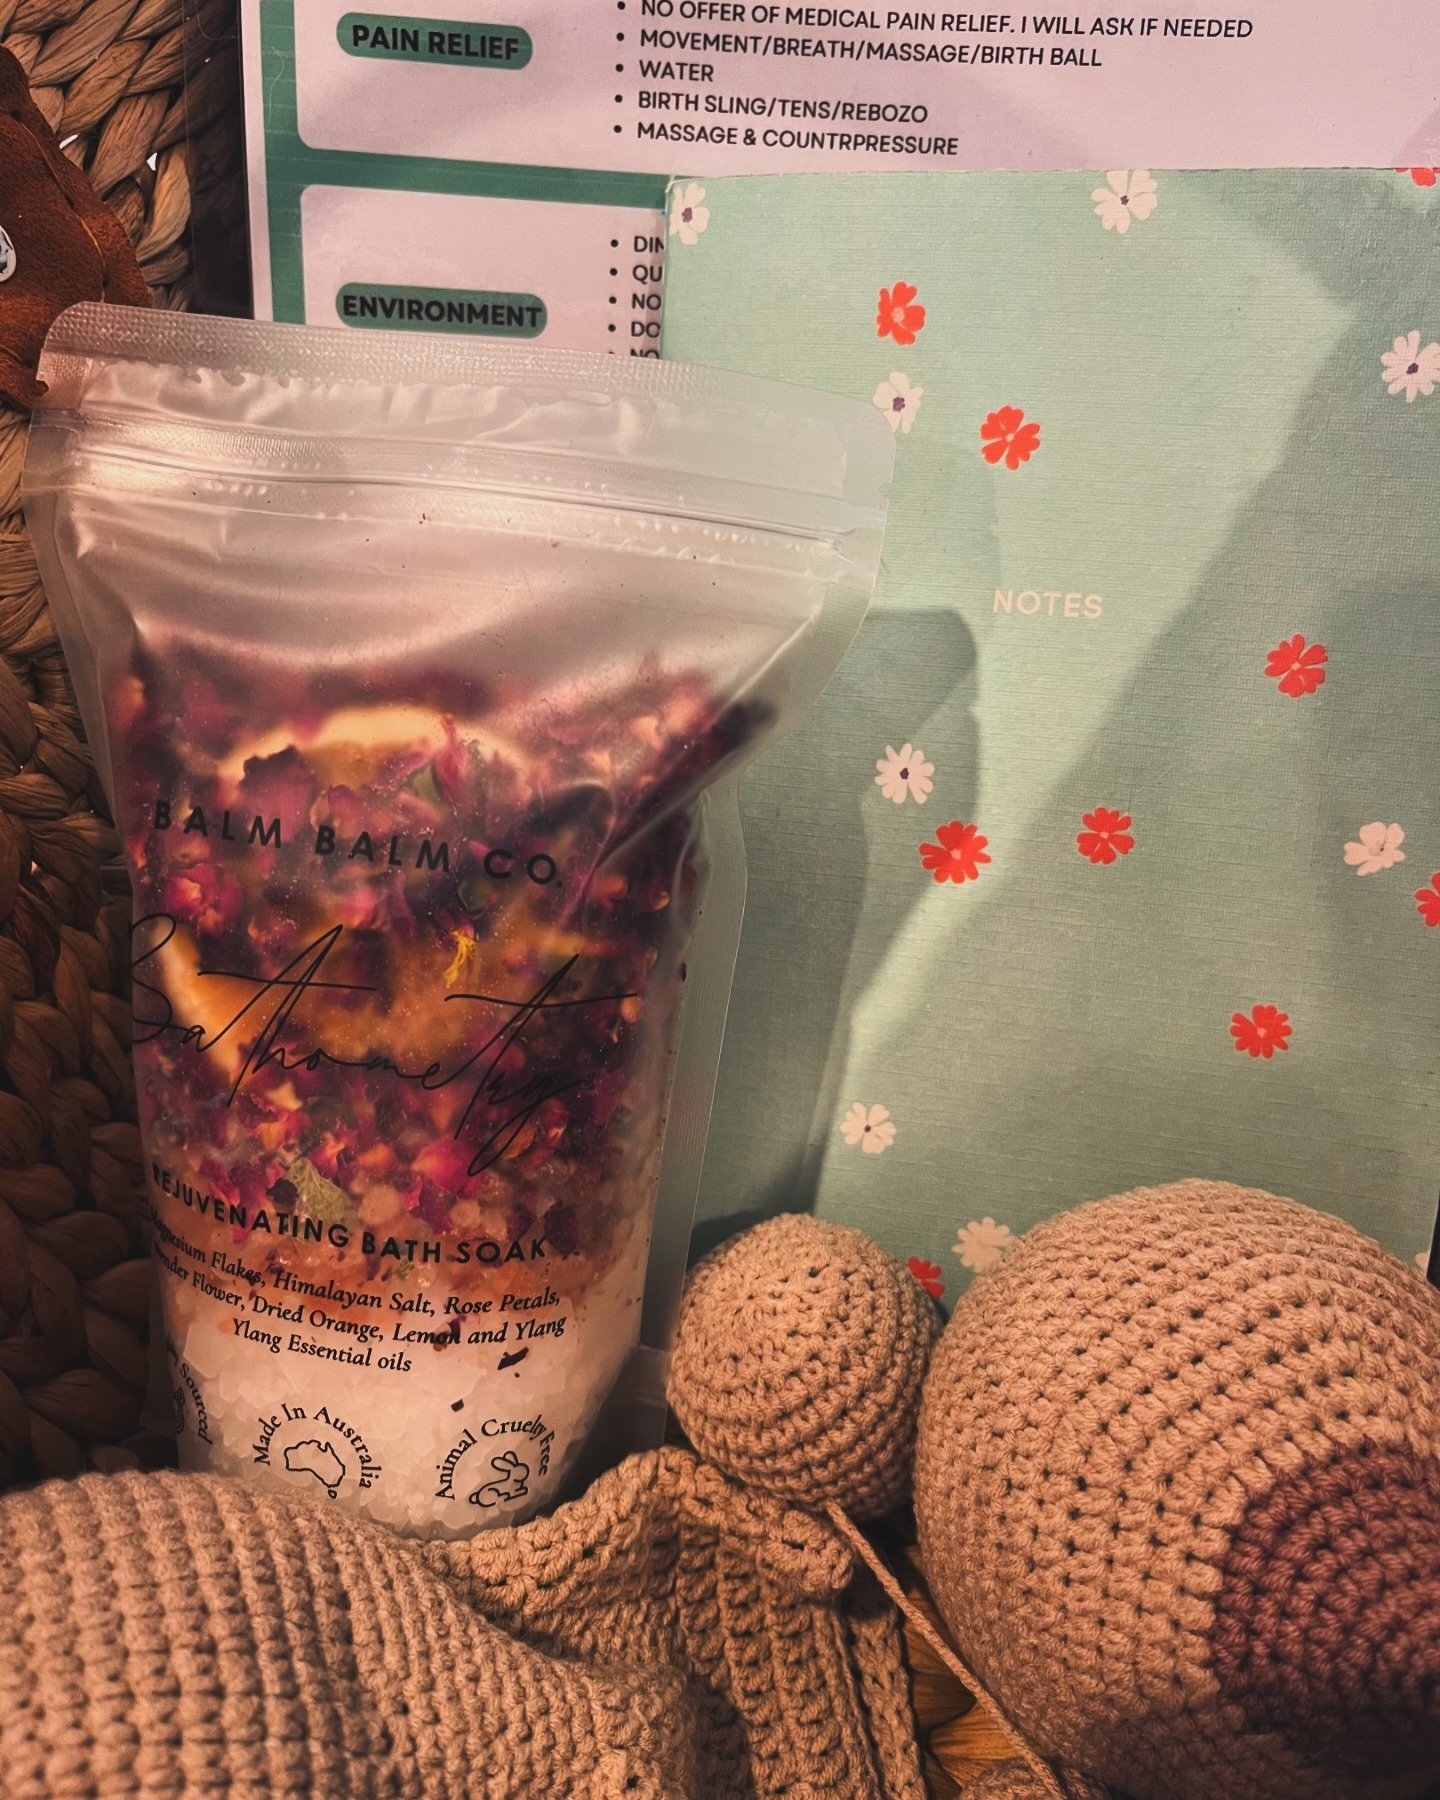 TODAY&rsquo;S DOULA BASKET
🧡 This Mama loves a bath - so a beautiful luxurious bath soak is the gift I picked for her
🧡 She already has my TENS, birth sling and rebozo at her home, the only thing I need to bring today is my crochet boob so we can c